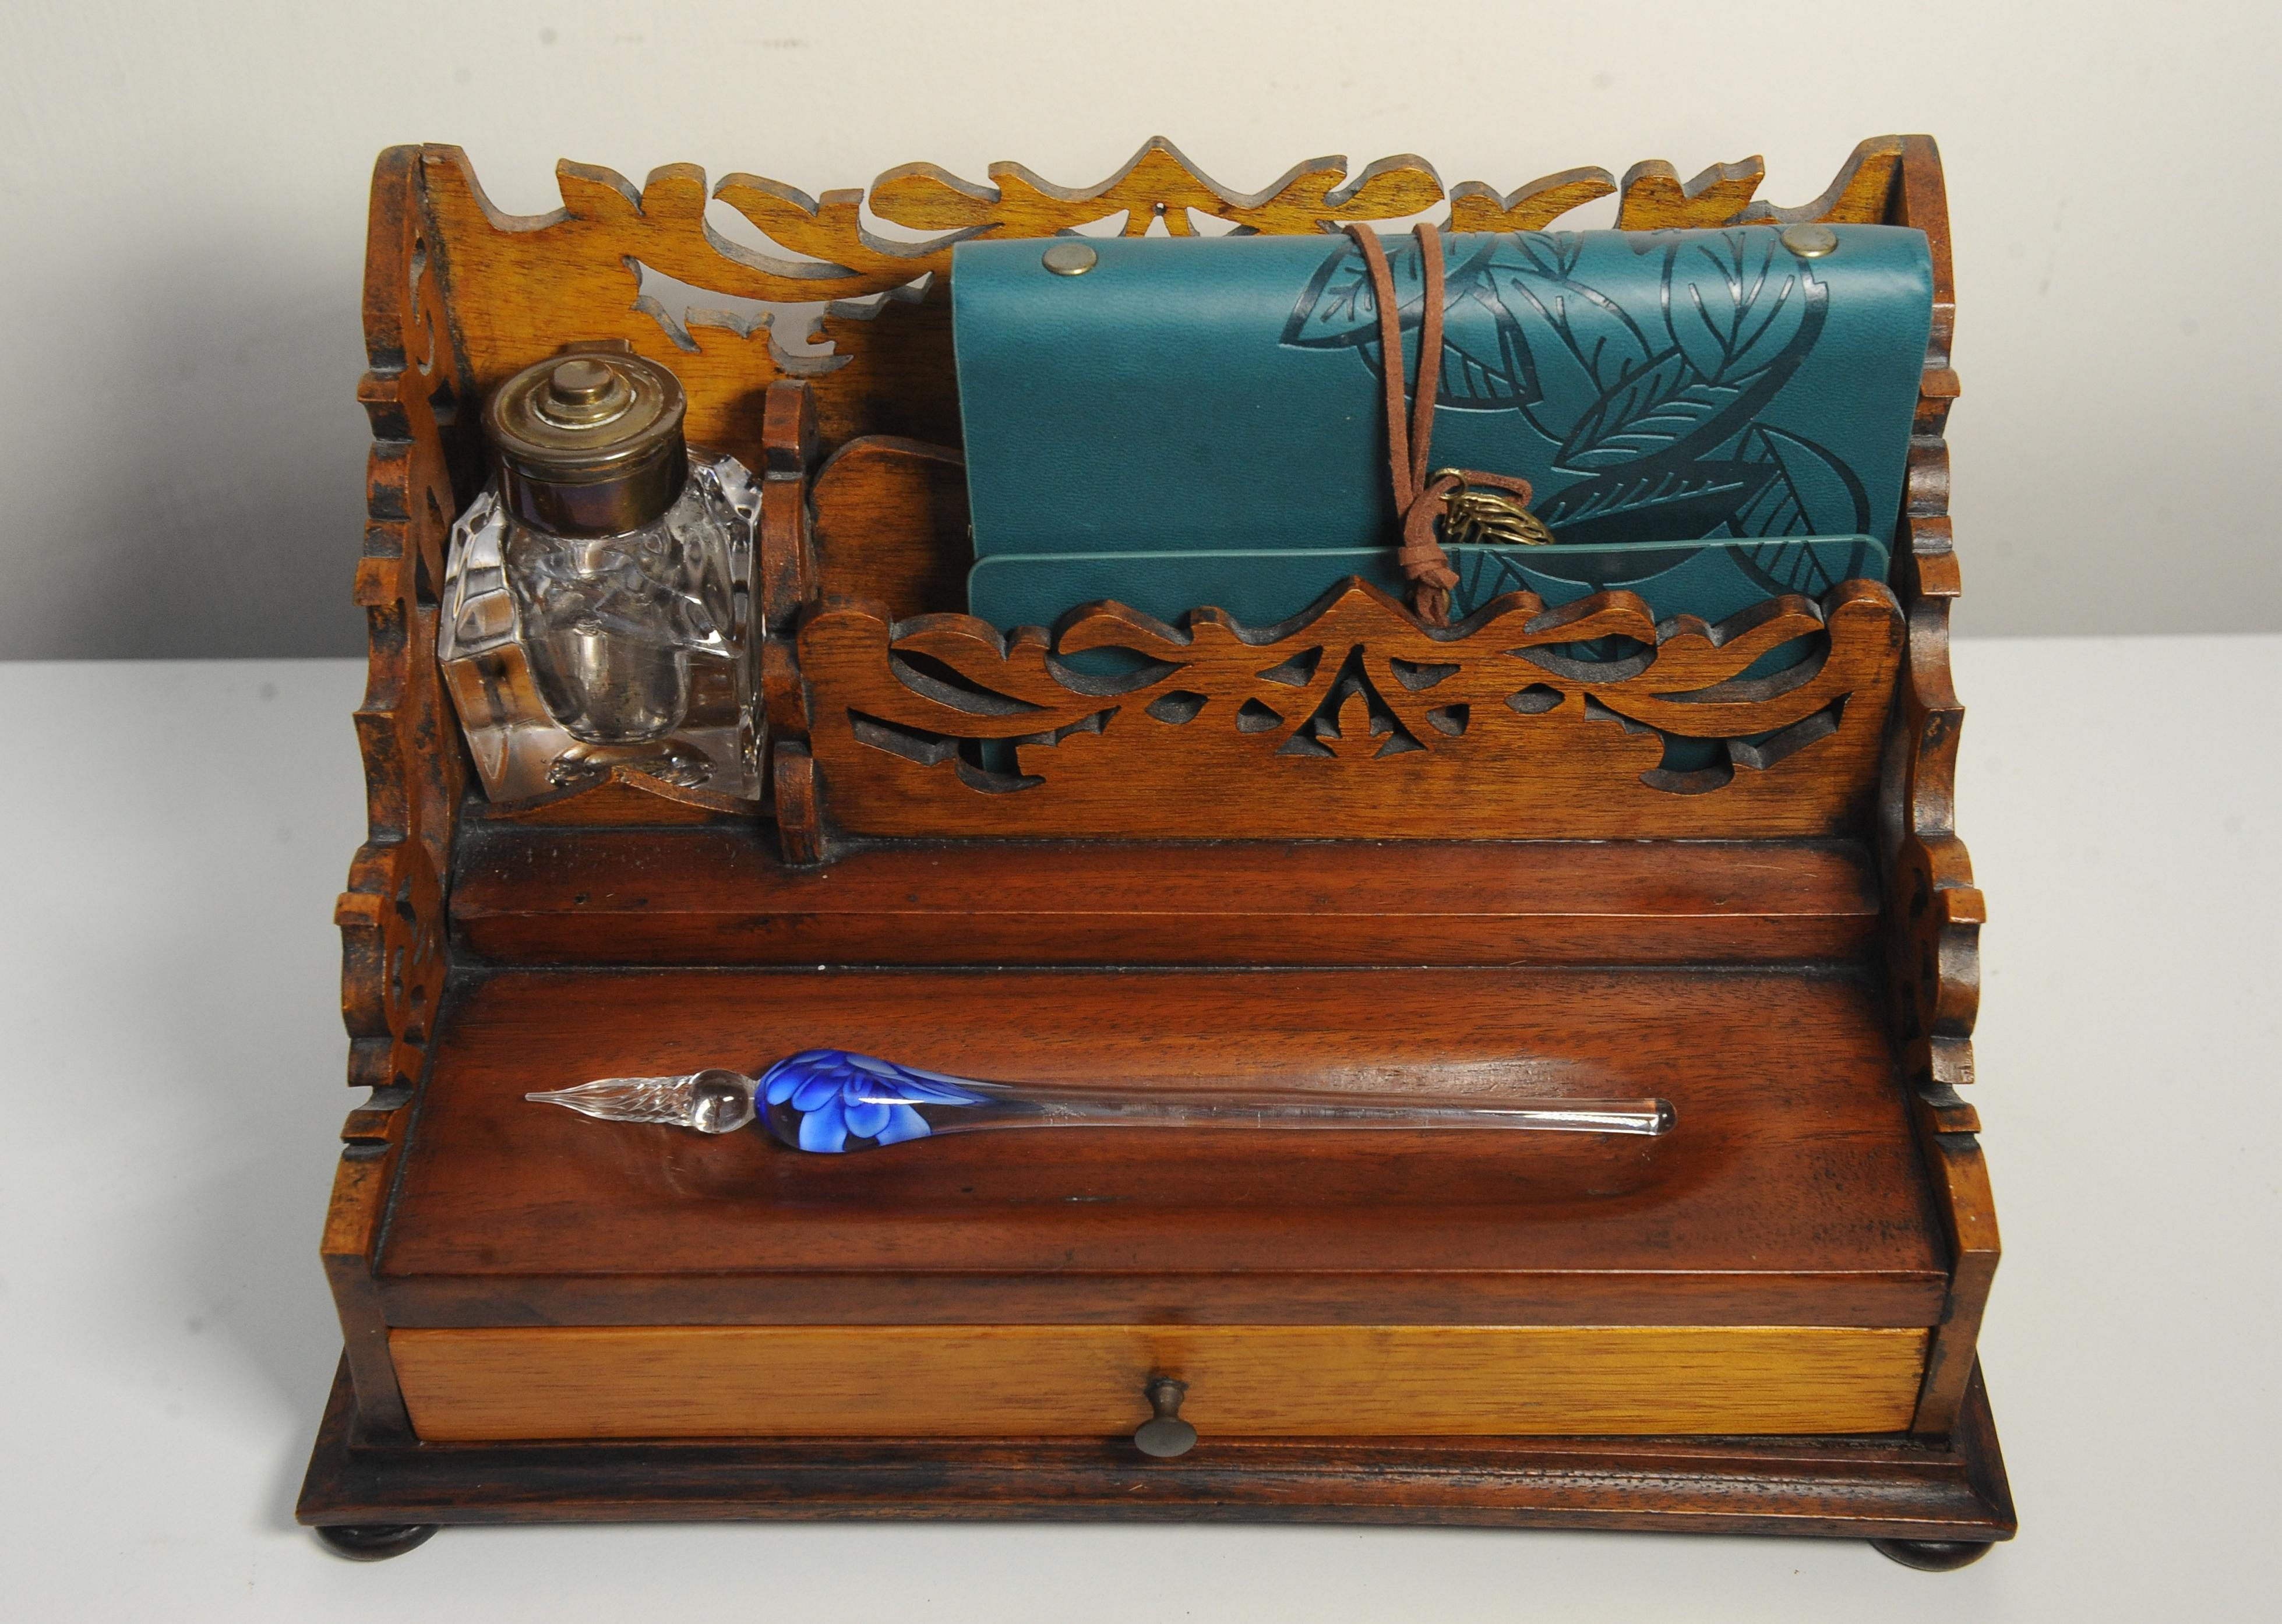 Elegant Victorian Oak Hand Crafted Desk Top Letter Rack With Intricately Cut, Art Nouveau Motifs Circa 1800's.

Supplied With a Heavy Cut Glass Brass Topped Inkwell, A Vintage Dip Pen & Modern Notepad

Ideal stationary/ envelope holder
